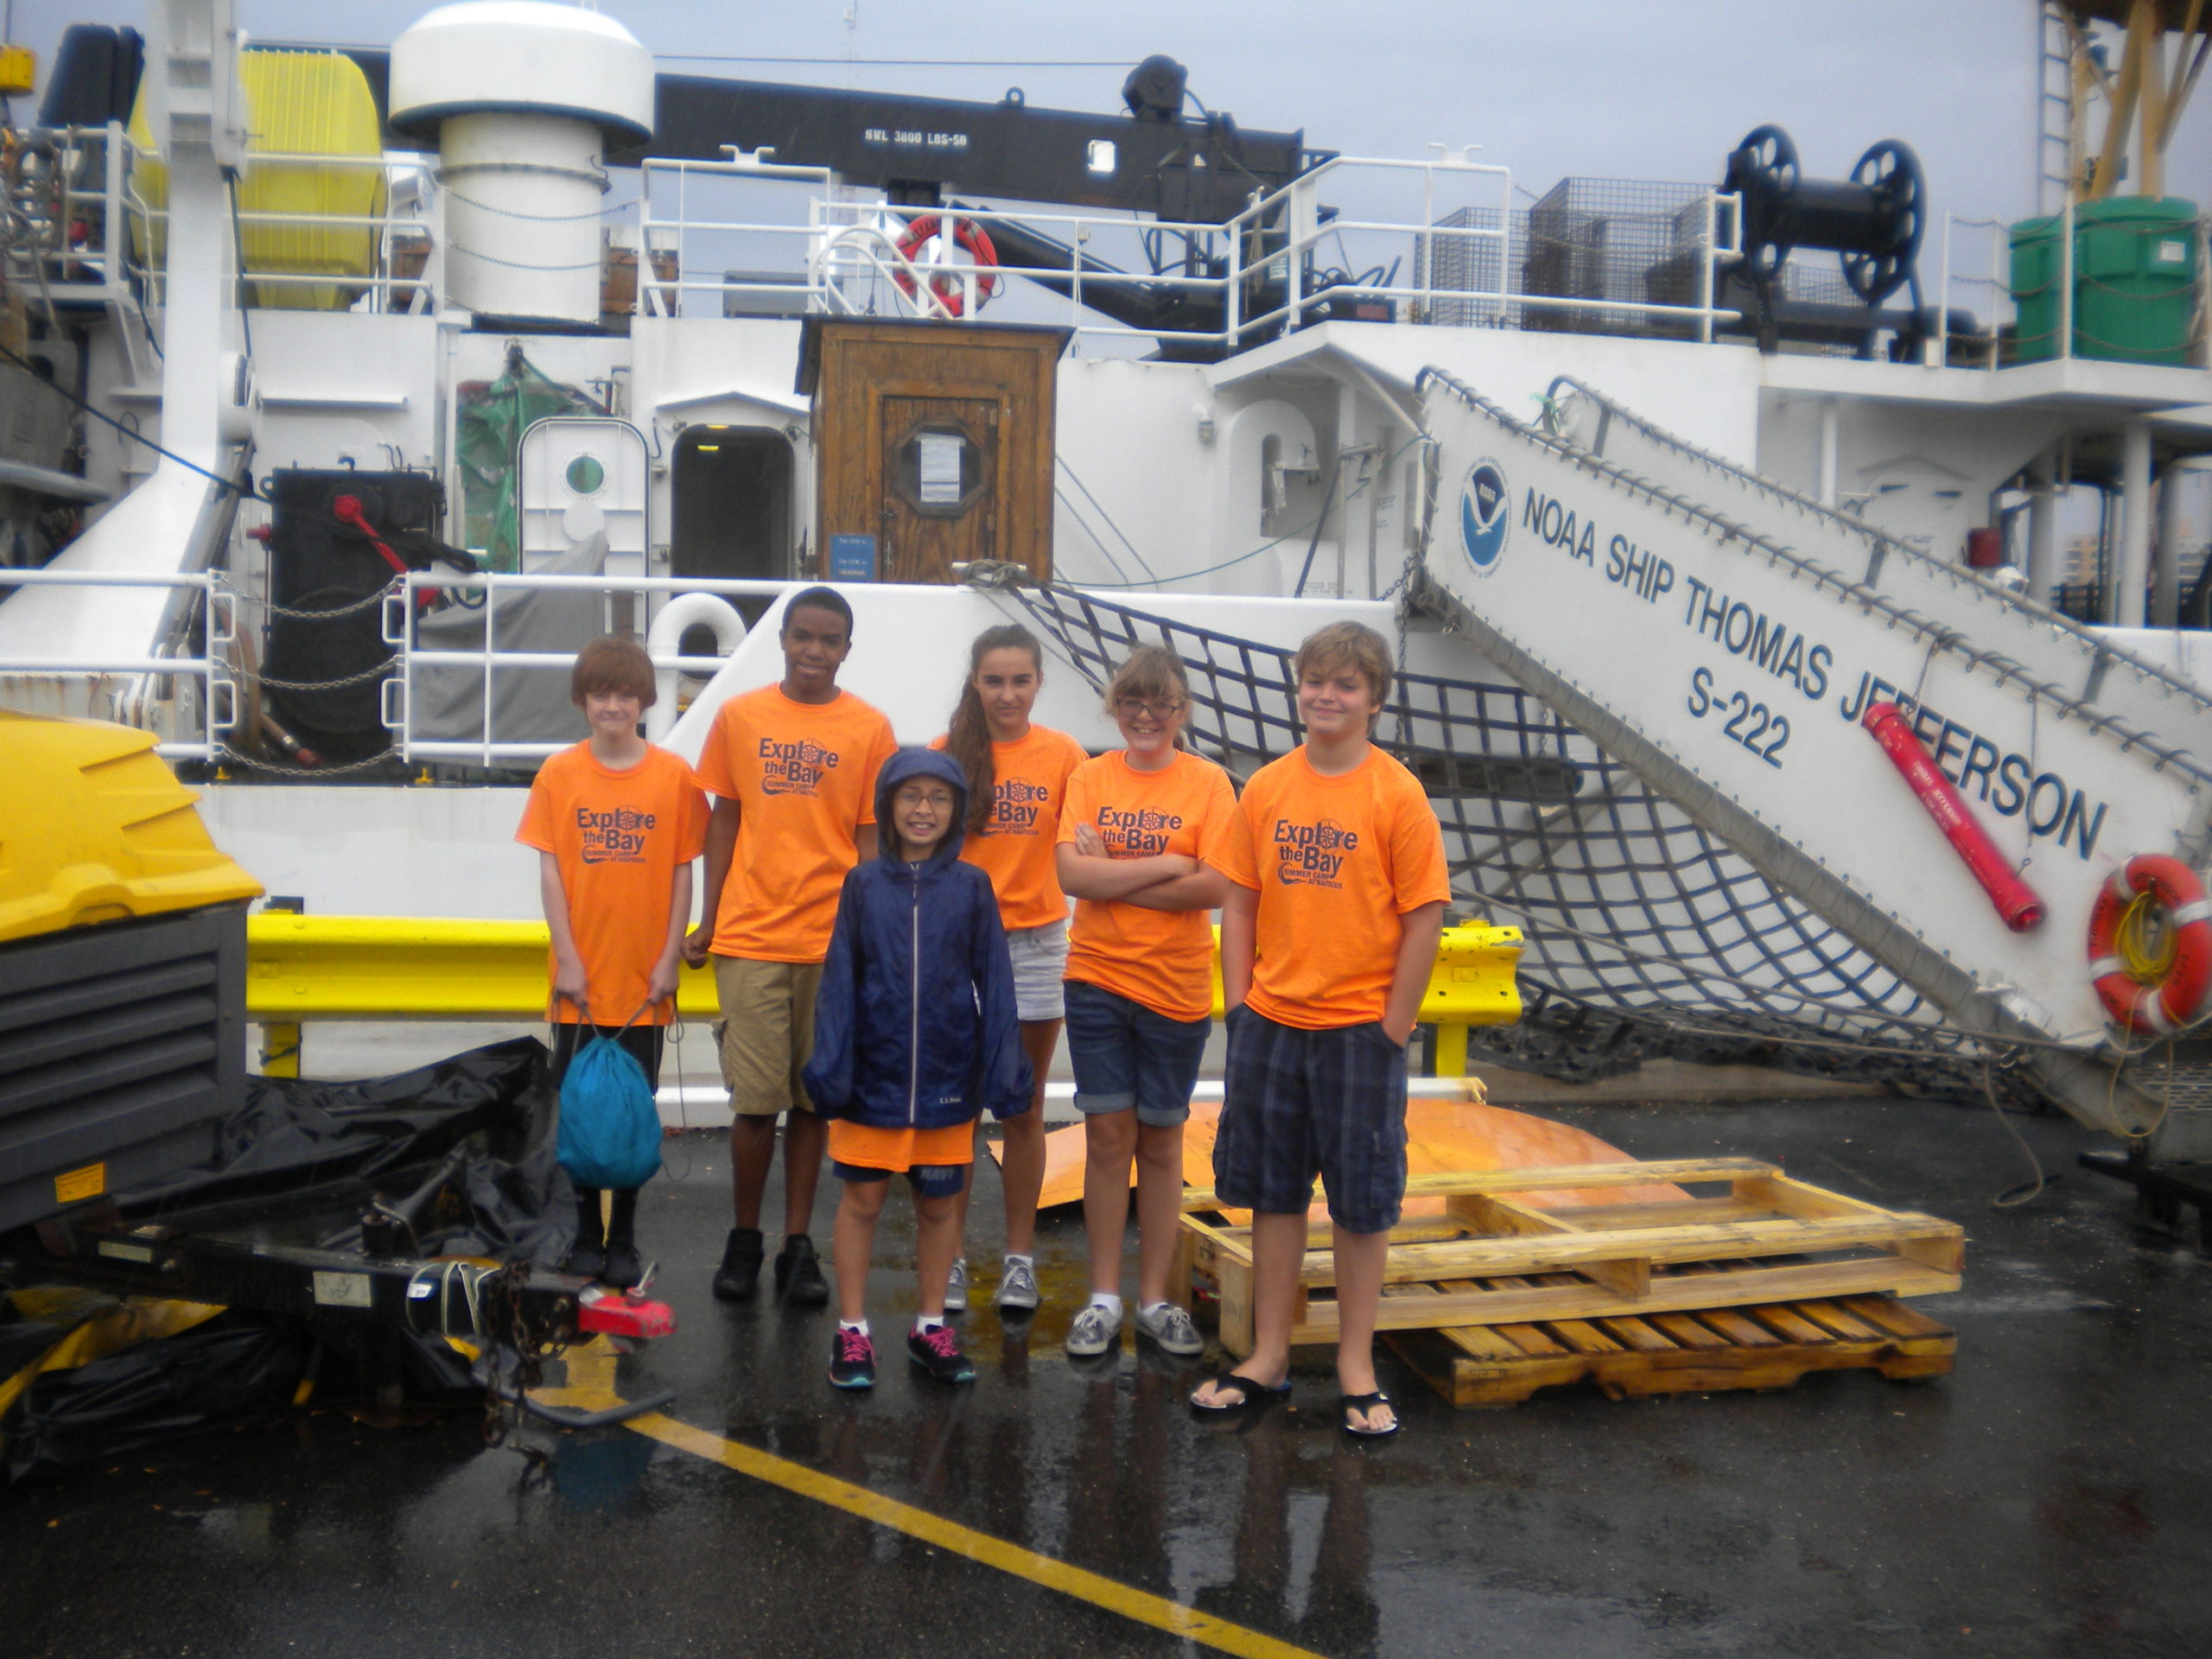 Student campers stand in front of the NOAA ship Thomas Jefferson.